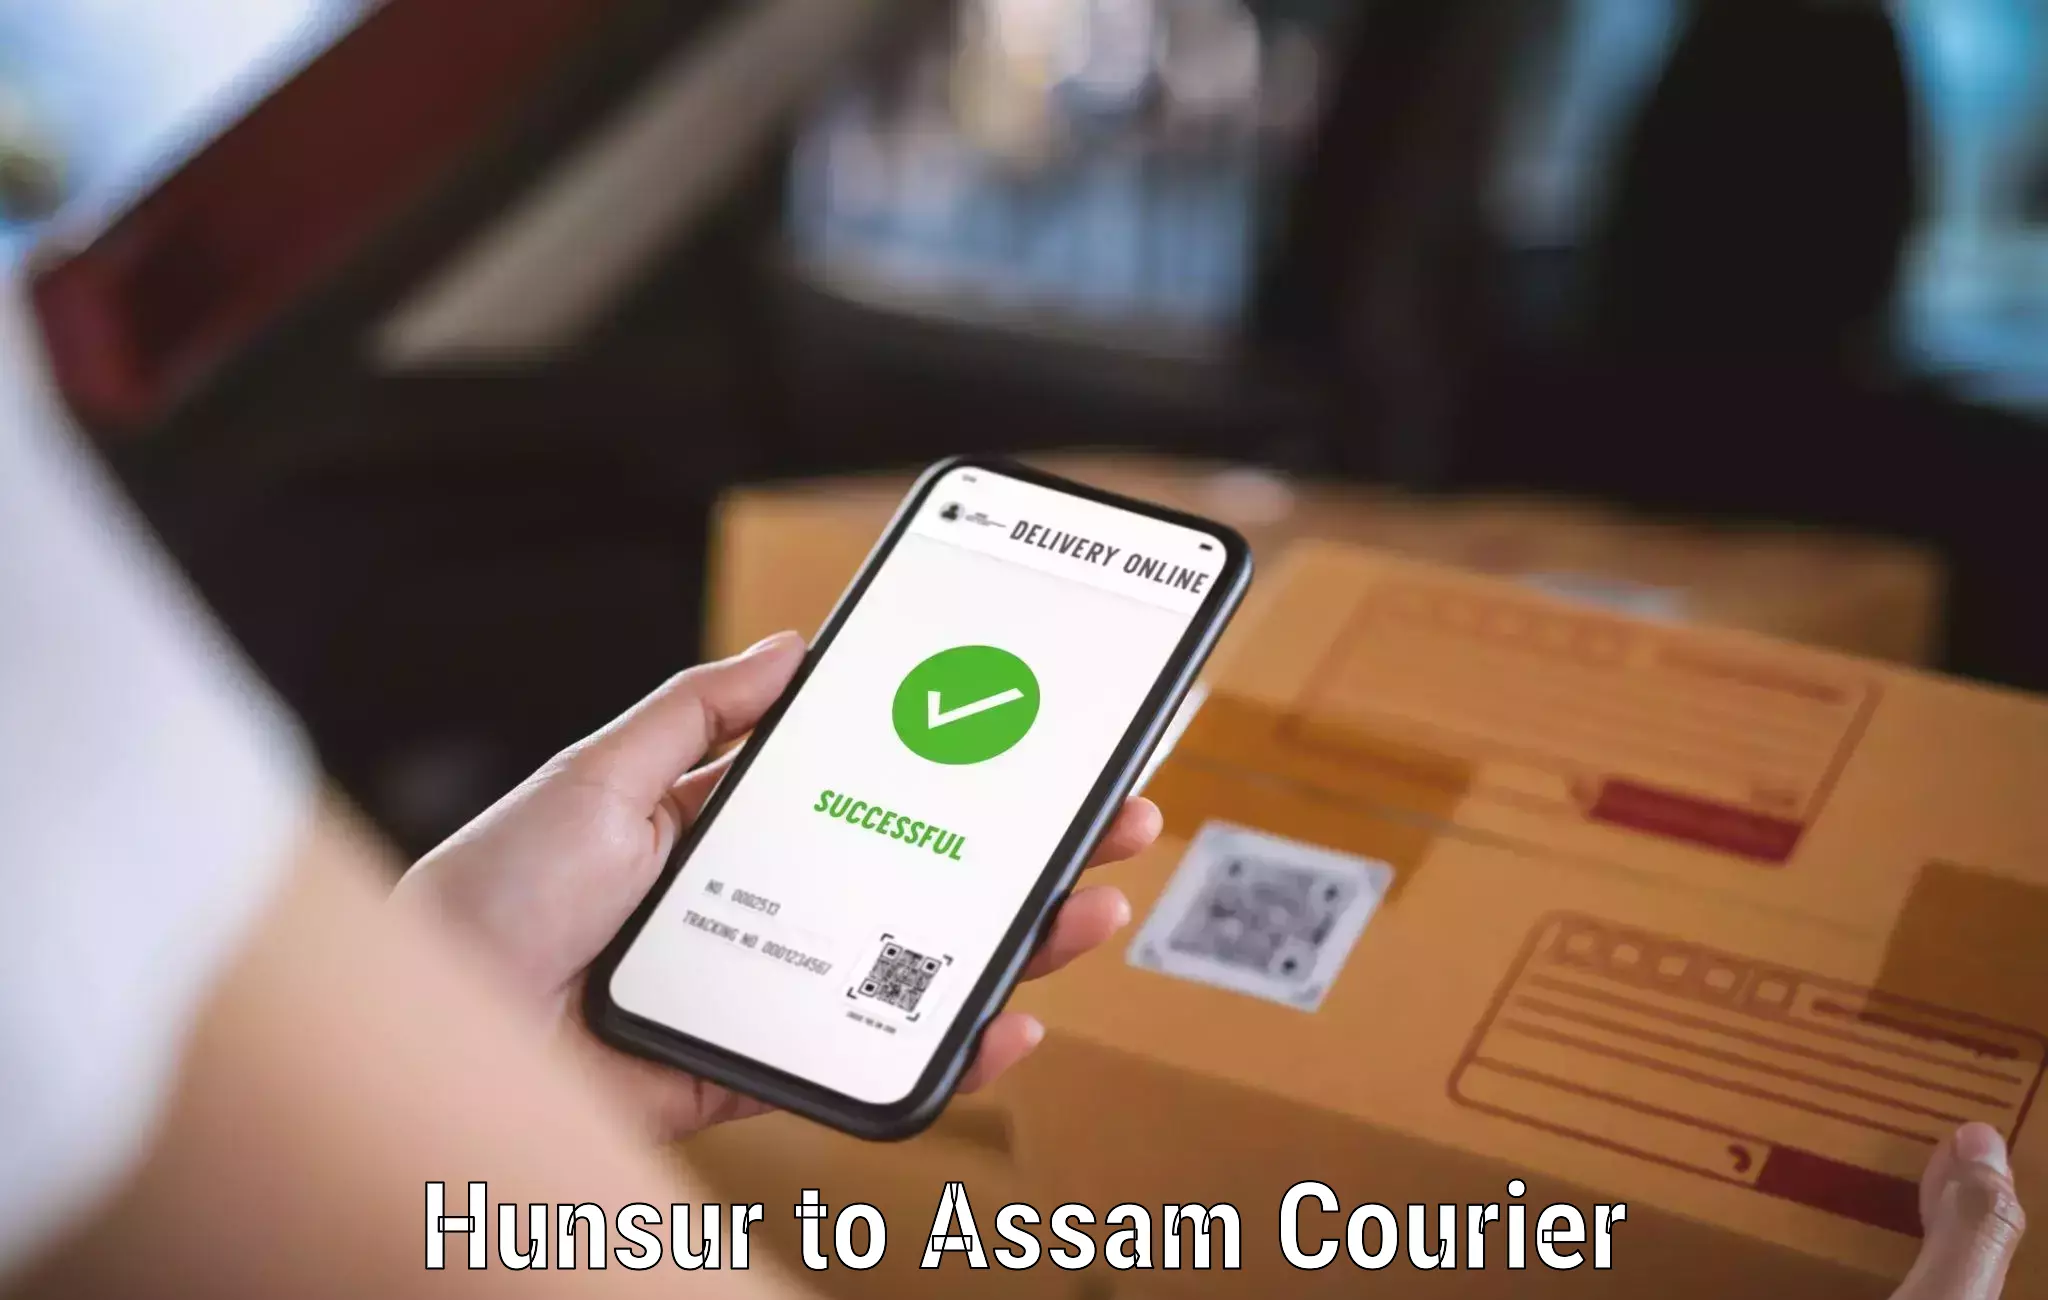 Advanced shipping services Hunsur to Assam